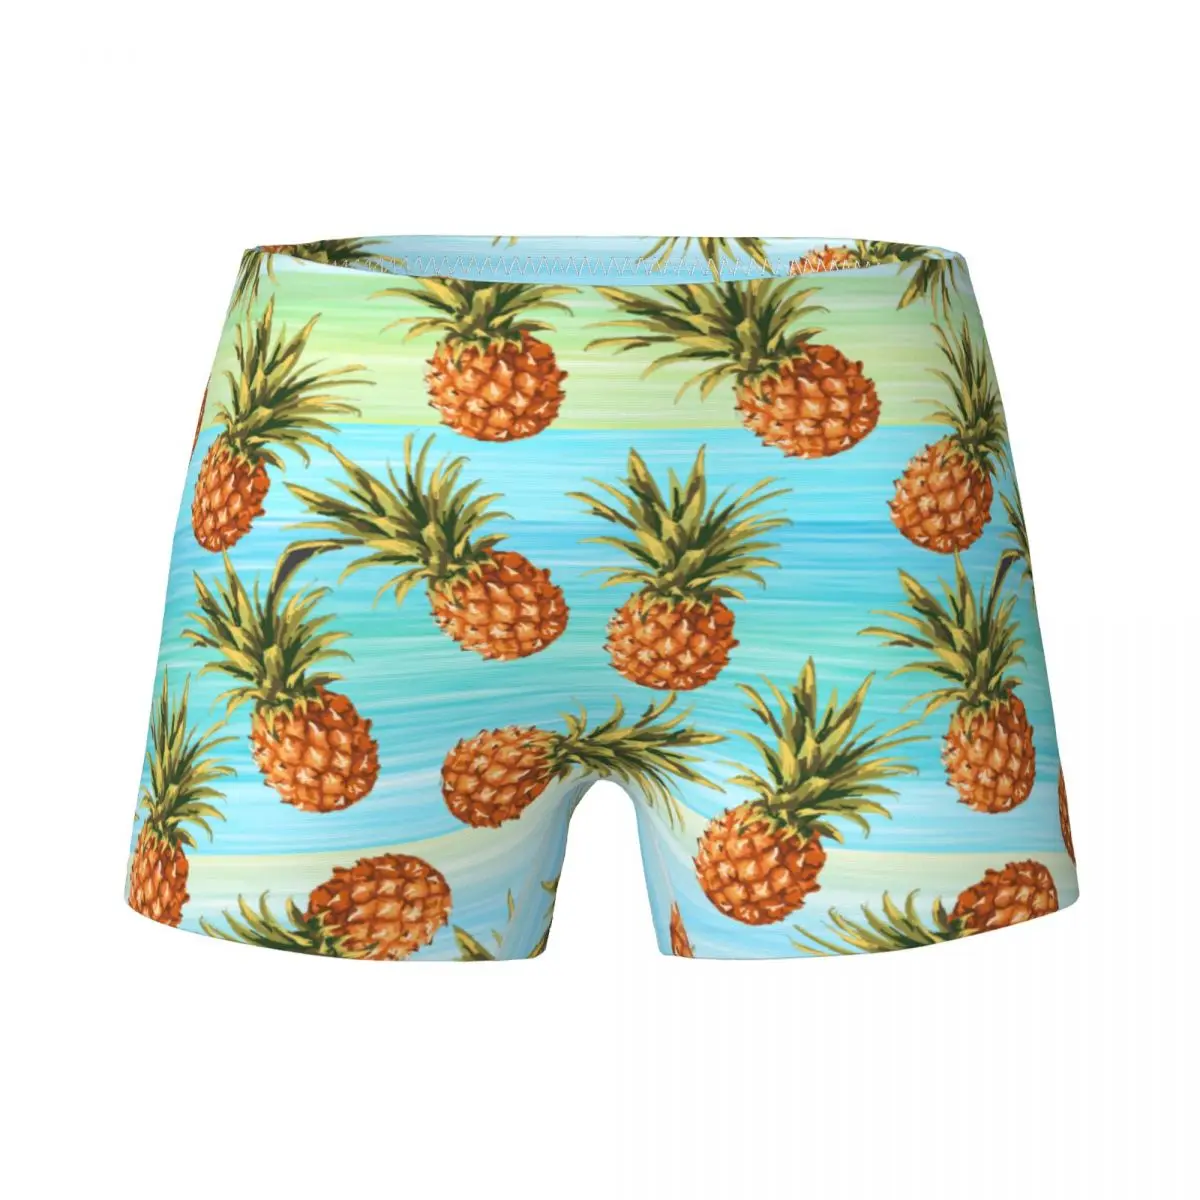 

Young Girls Pineapple Fruit Blue Green Stripes Boxers Child Cotton Cute Underwear Teenagers Underpants Soft Shorts 4-15Y